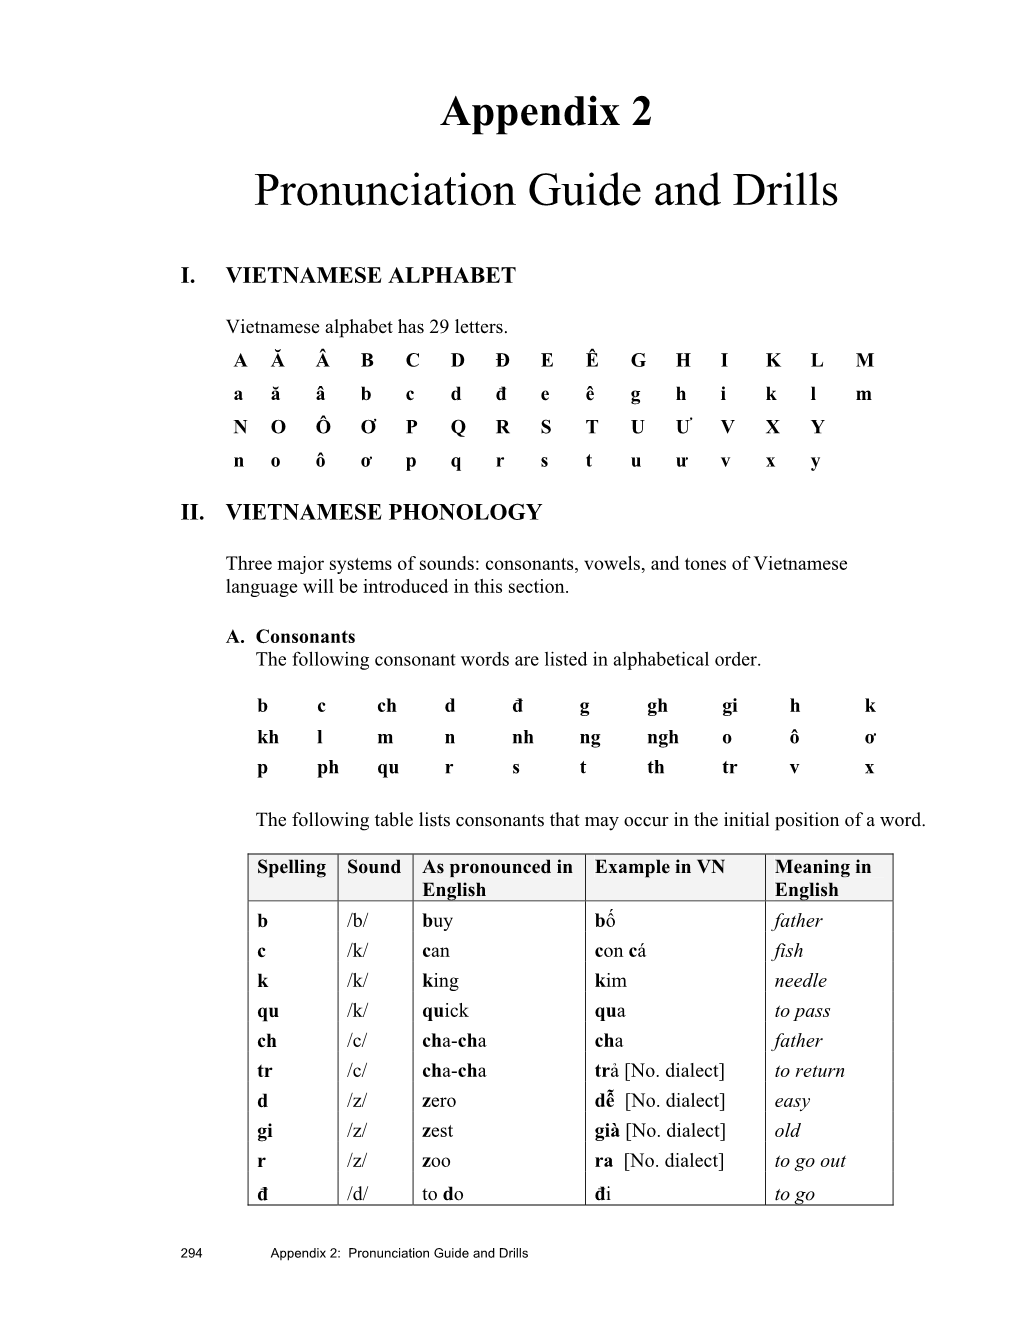 Pronunciation Guide and Drills